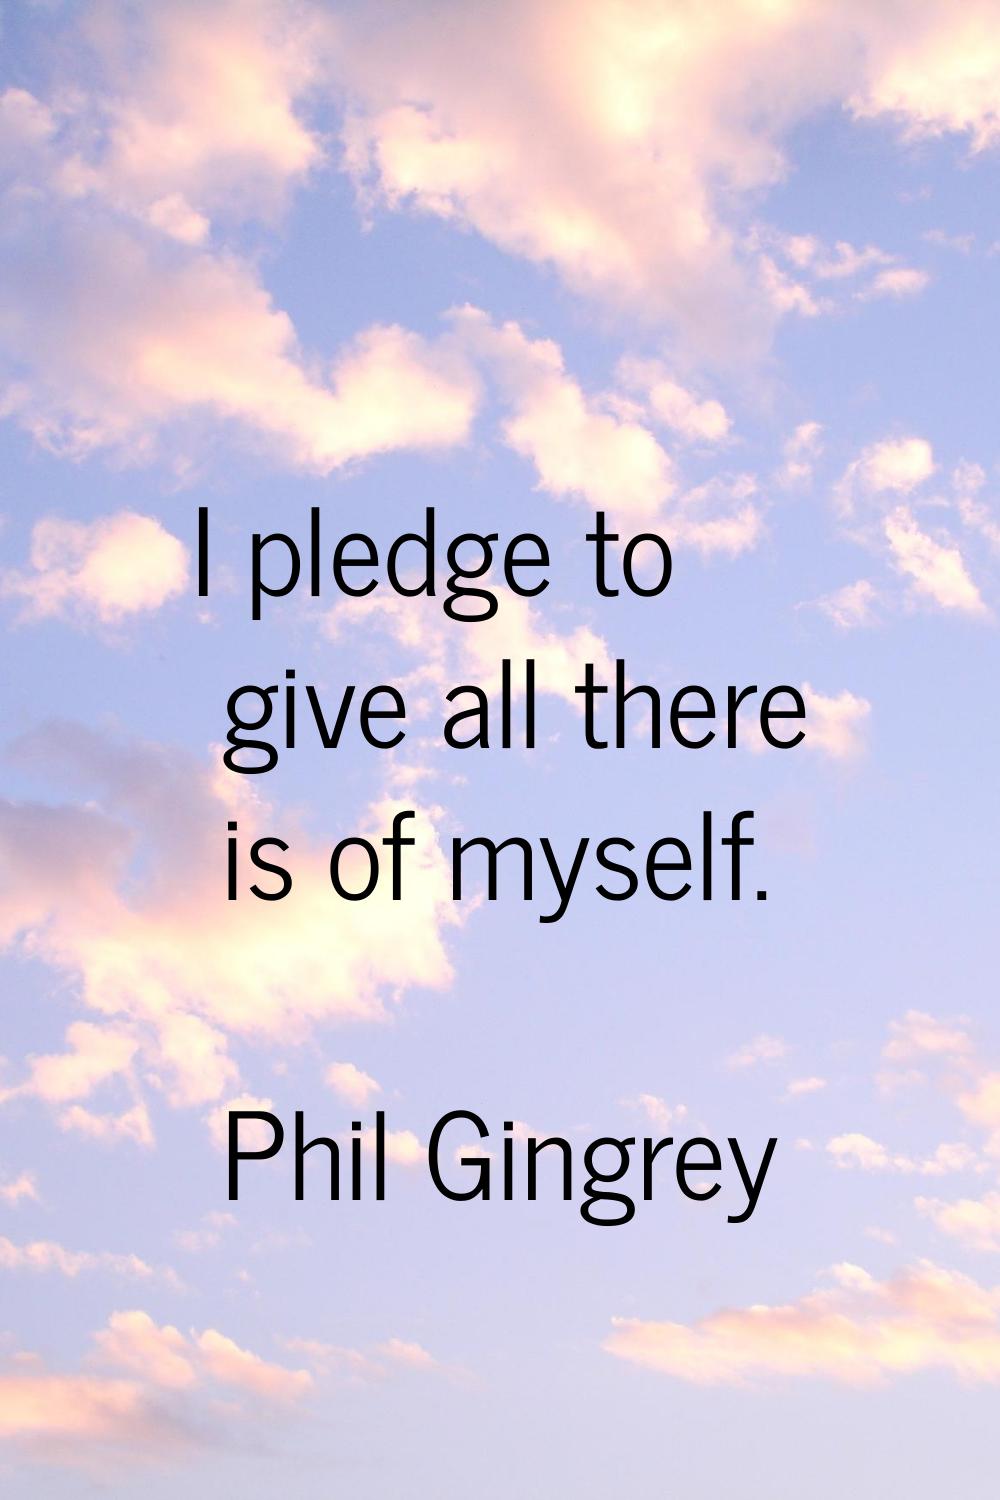 I pledge to give all there is of myself.